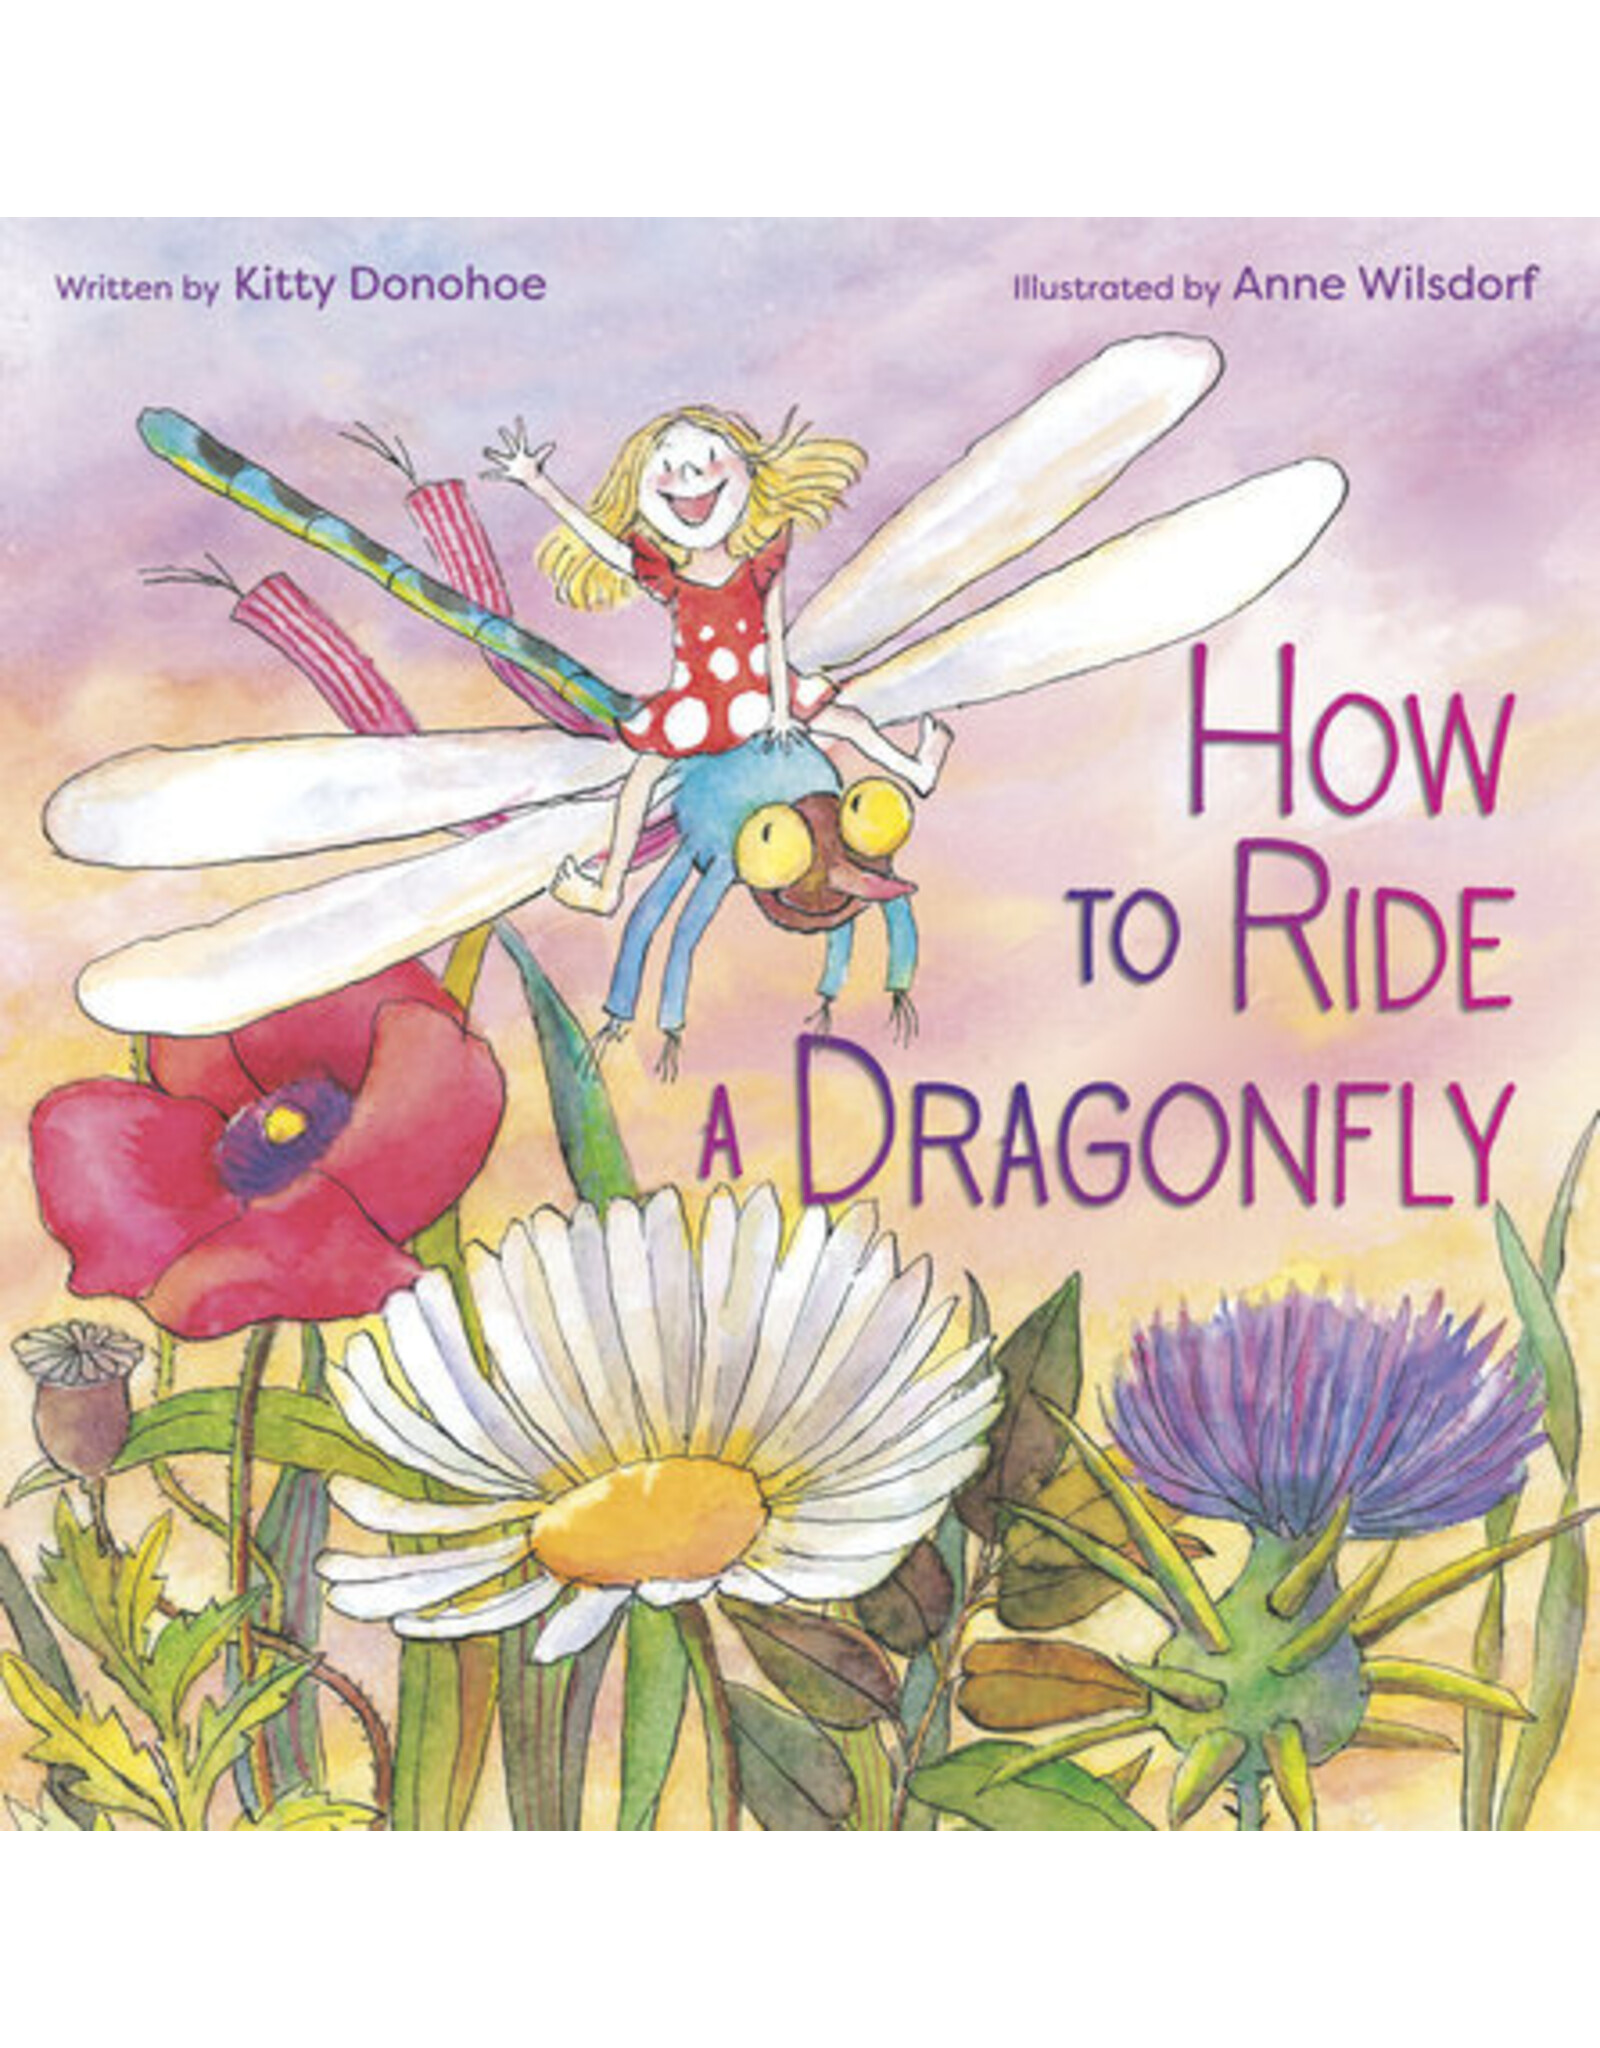 How to Ride A Dreagonfly